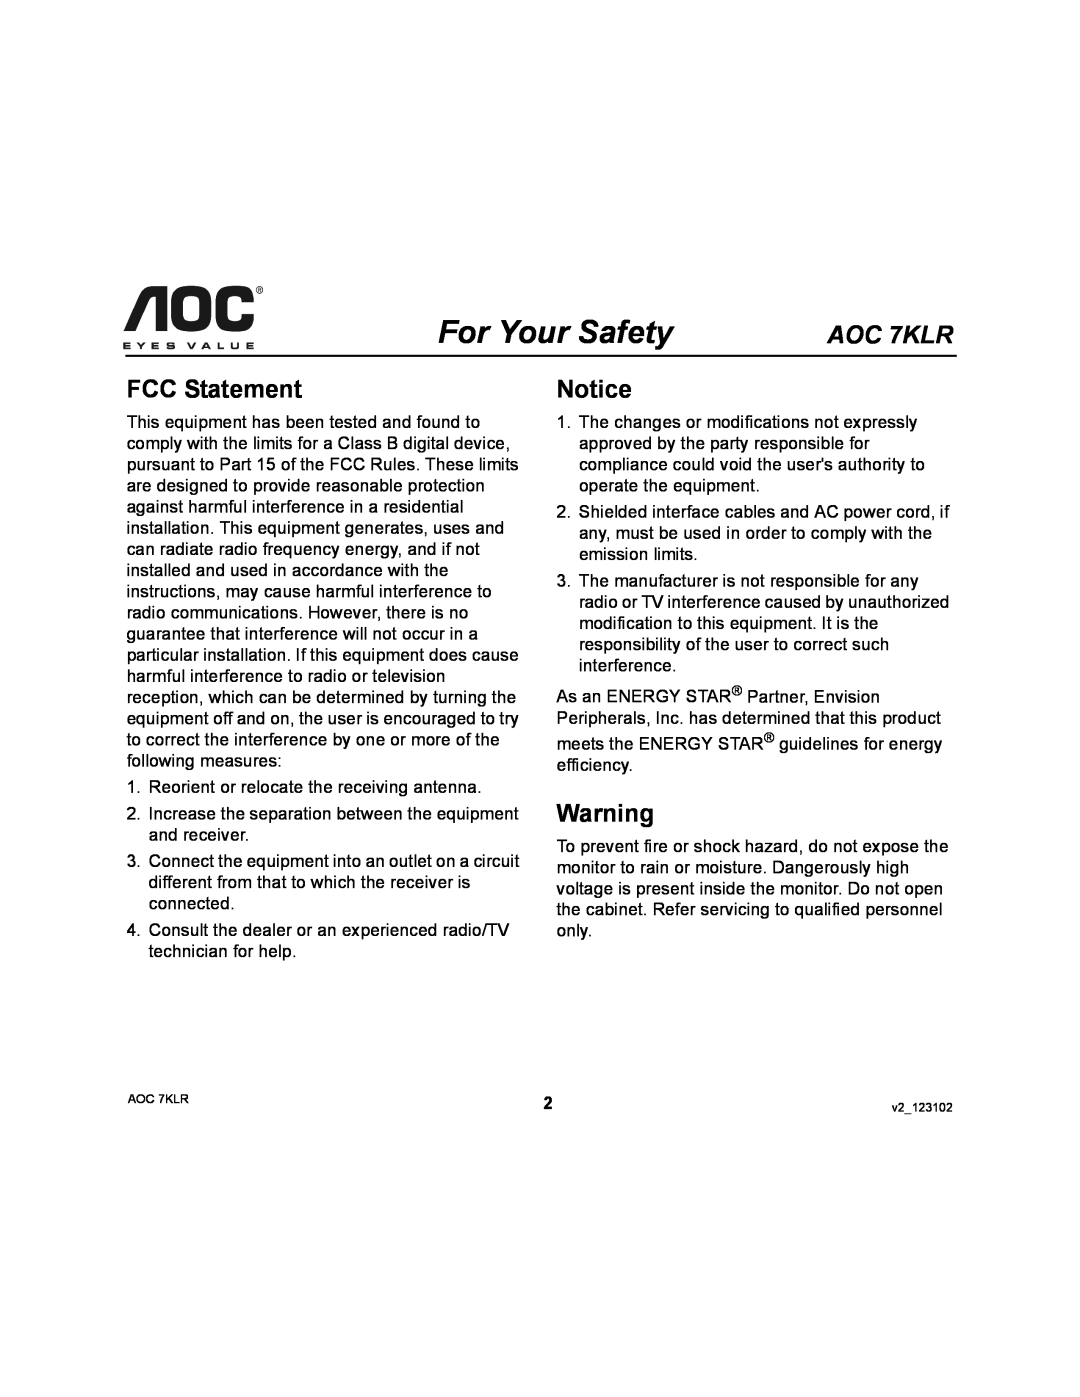 AOC user manual For Your Safety, FCC Statement, AOC 7KLR 